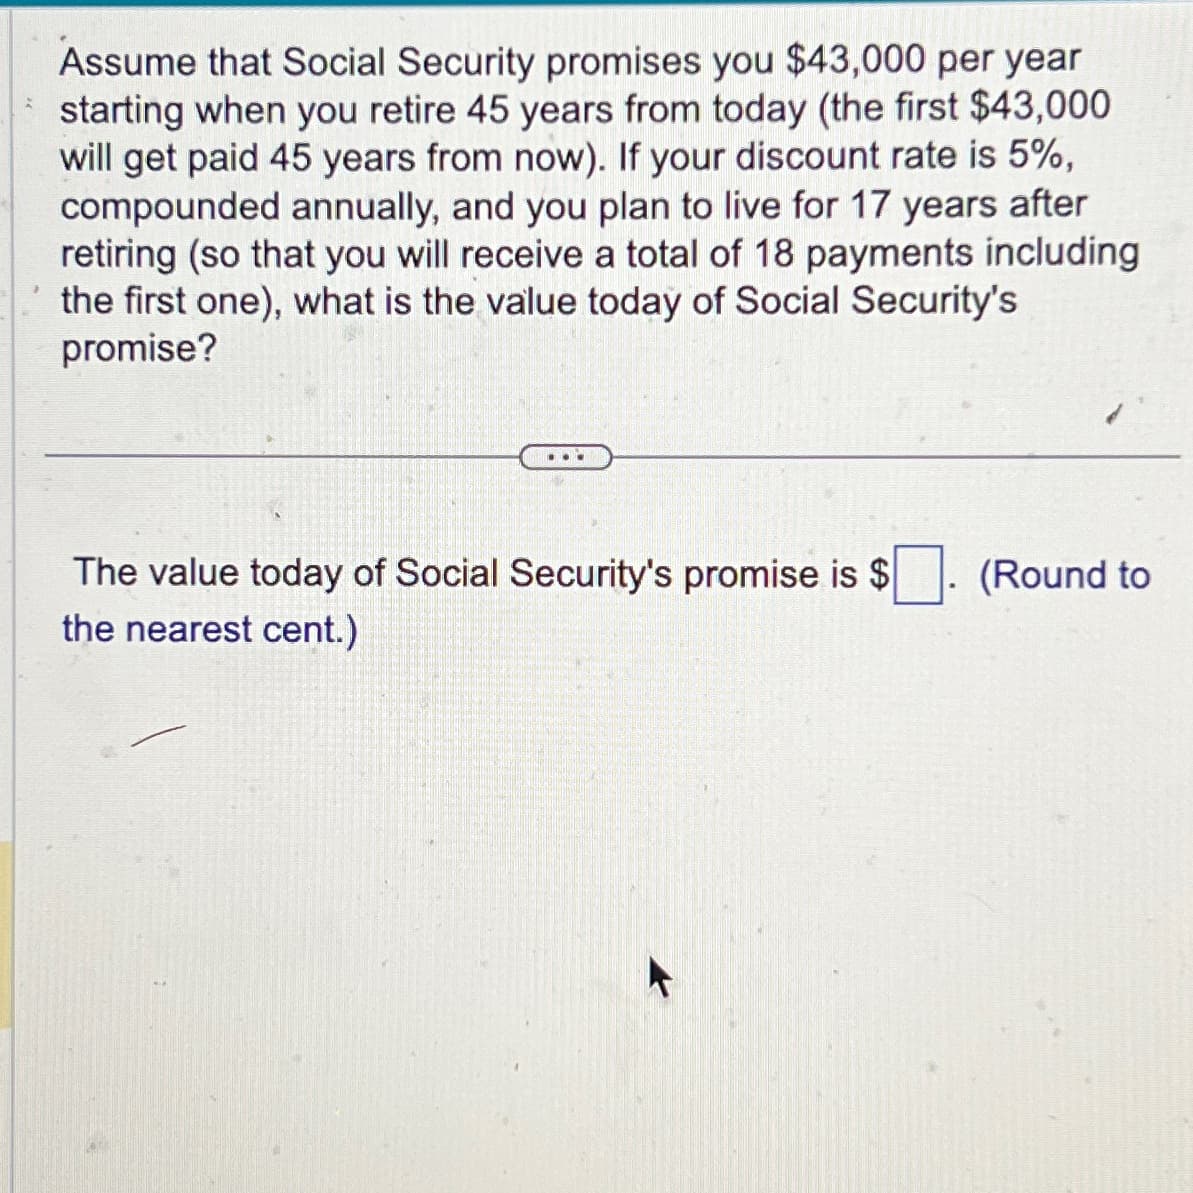 Assume that Social Security promises you $43,000 per year
starting when you retire 45 years from today (the first $43,000
will get paid 45 years from now). If your discount rate is 5%,
compounded annually, and you plan to live for 17 years after
retiring (so that you will receive a total of 18 payments including
the first one), what is the value today of Social Security's
promise?
...
The value today of Social Security's promise is $
the nearest cent.)
(Round to